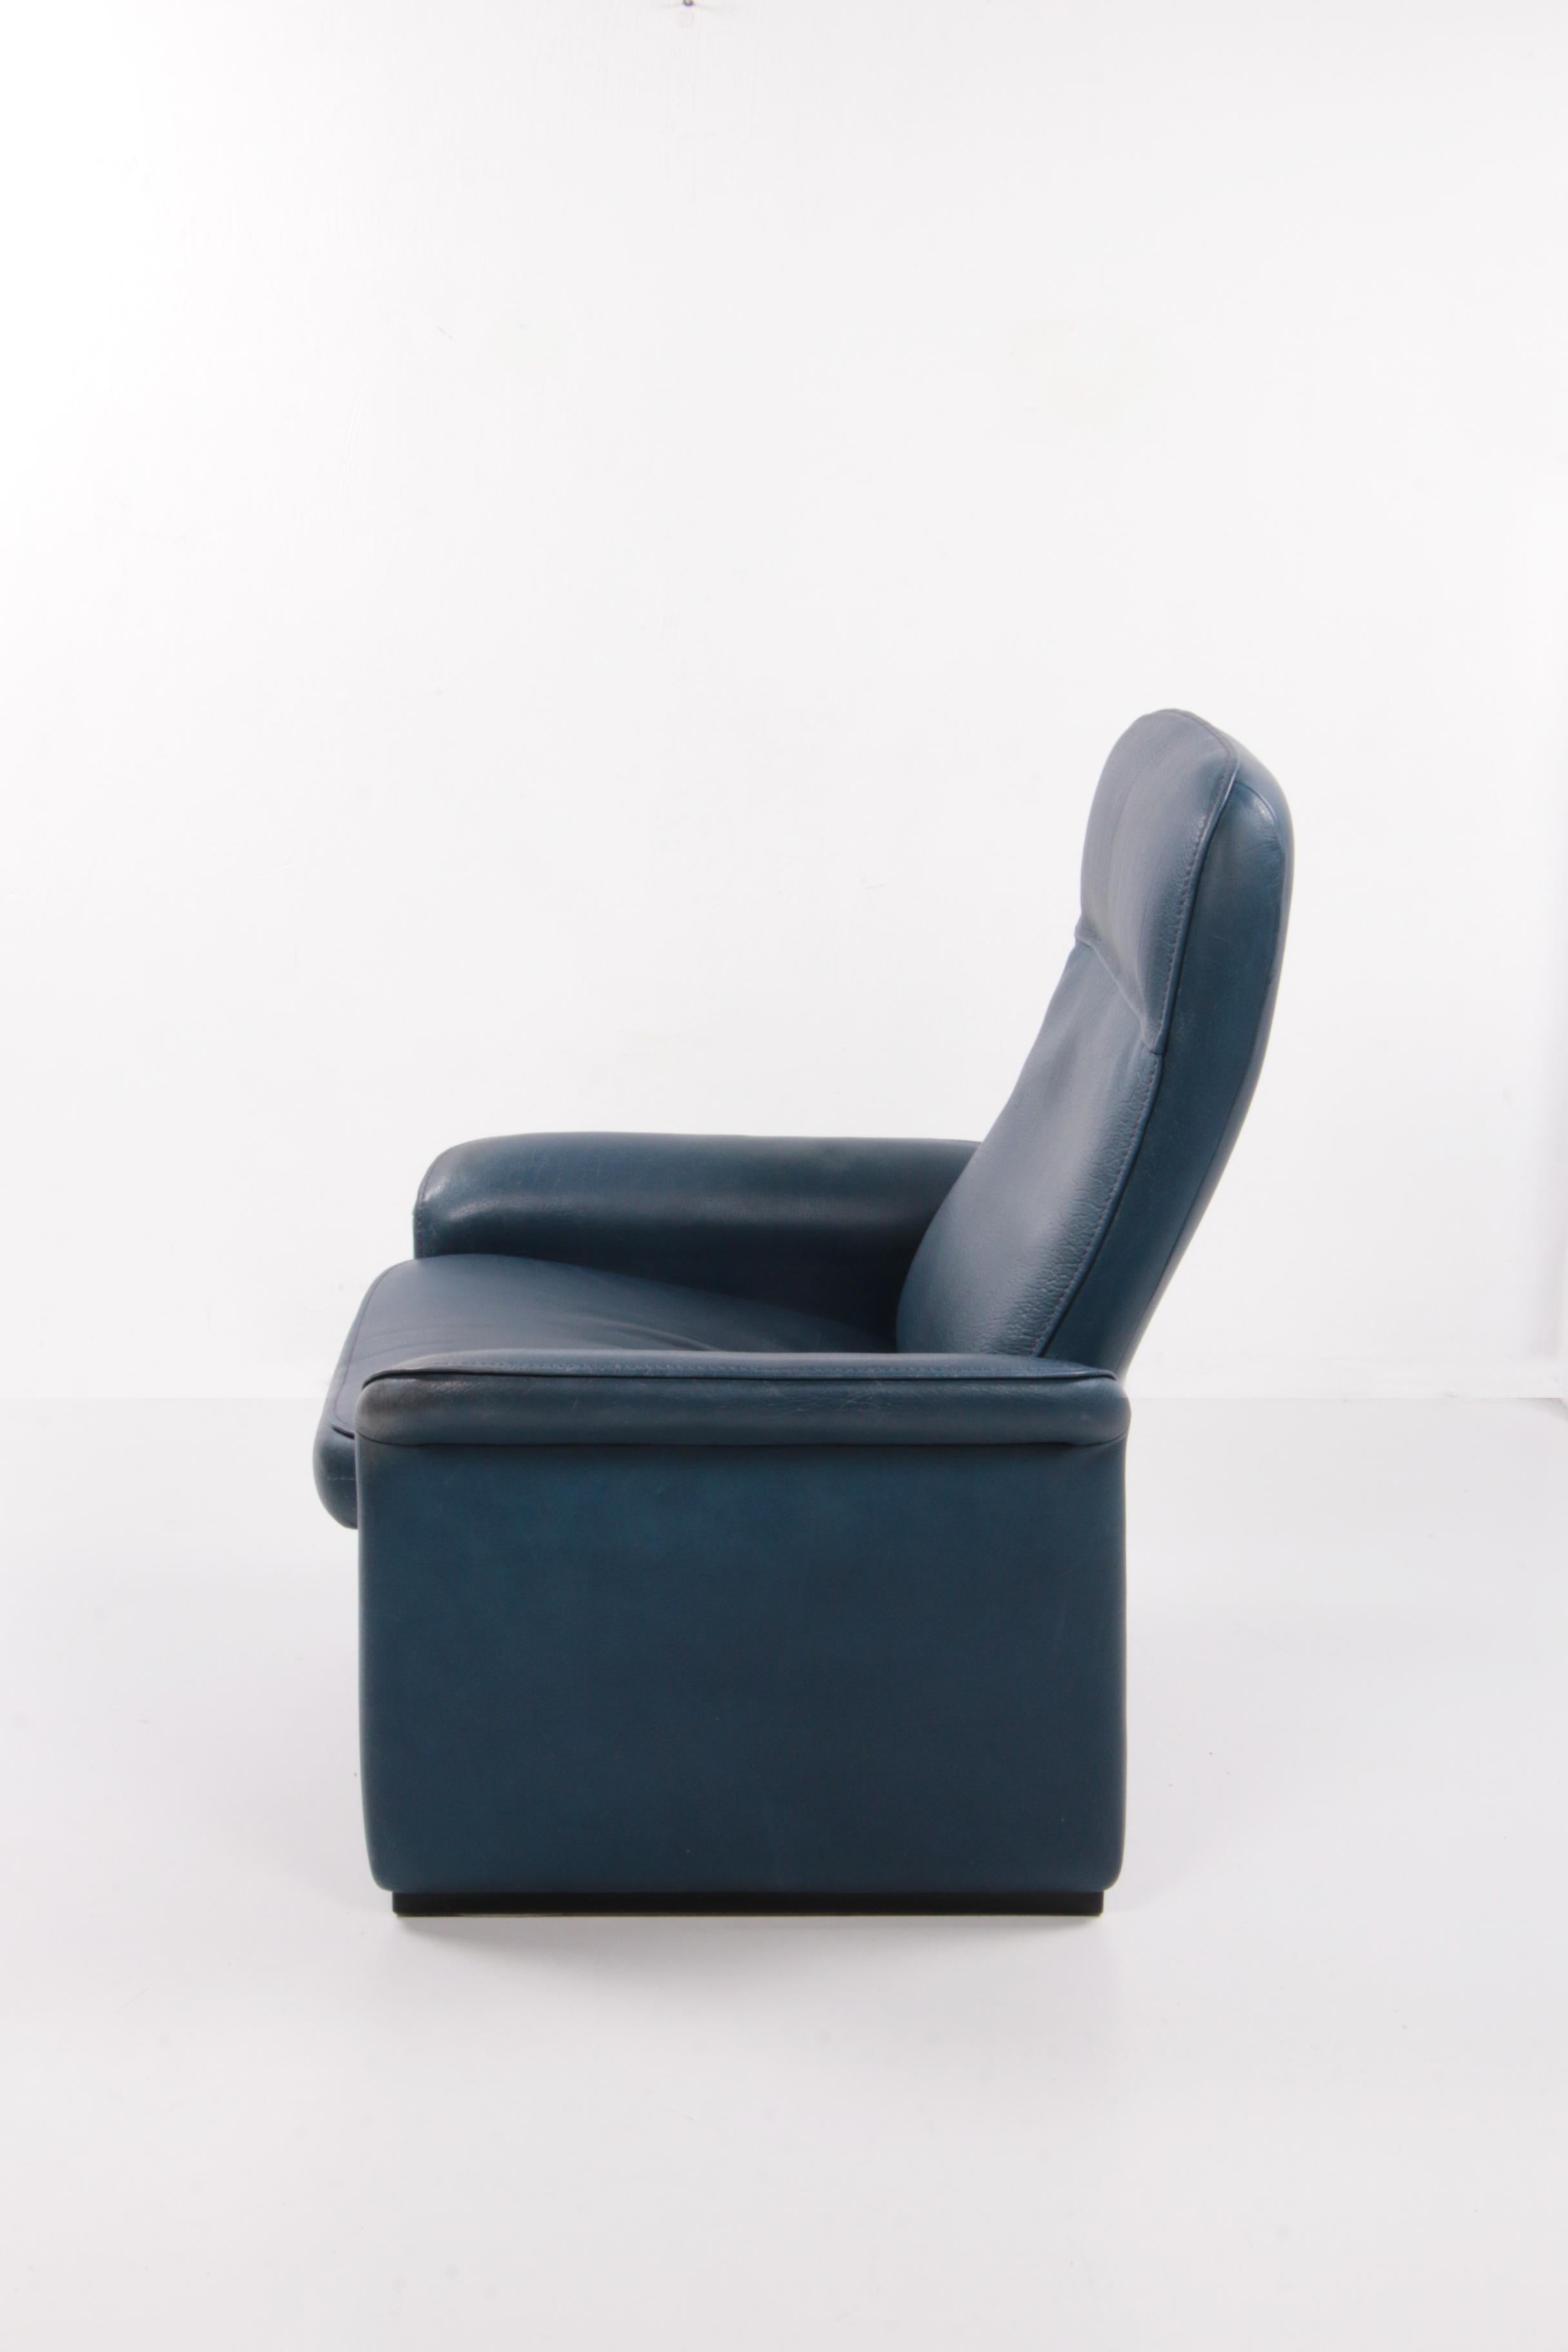 Swiss De Sede Ds 50 Relax Armchair with Hocker Leather Petrol Colour, 1980 Switzerland